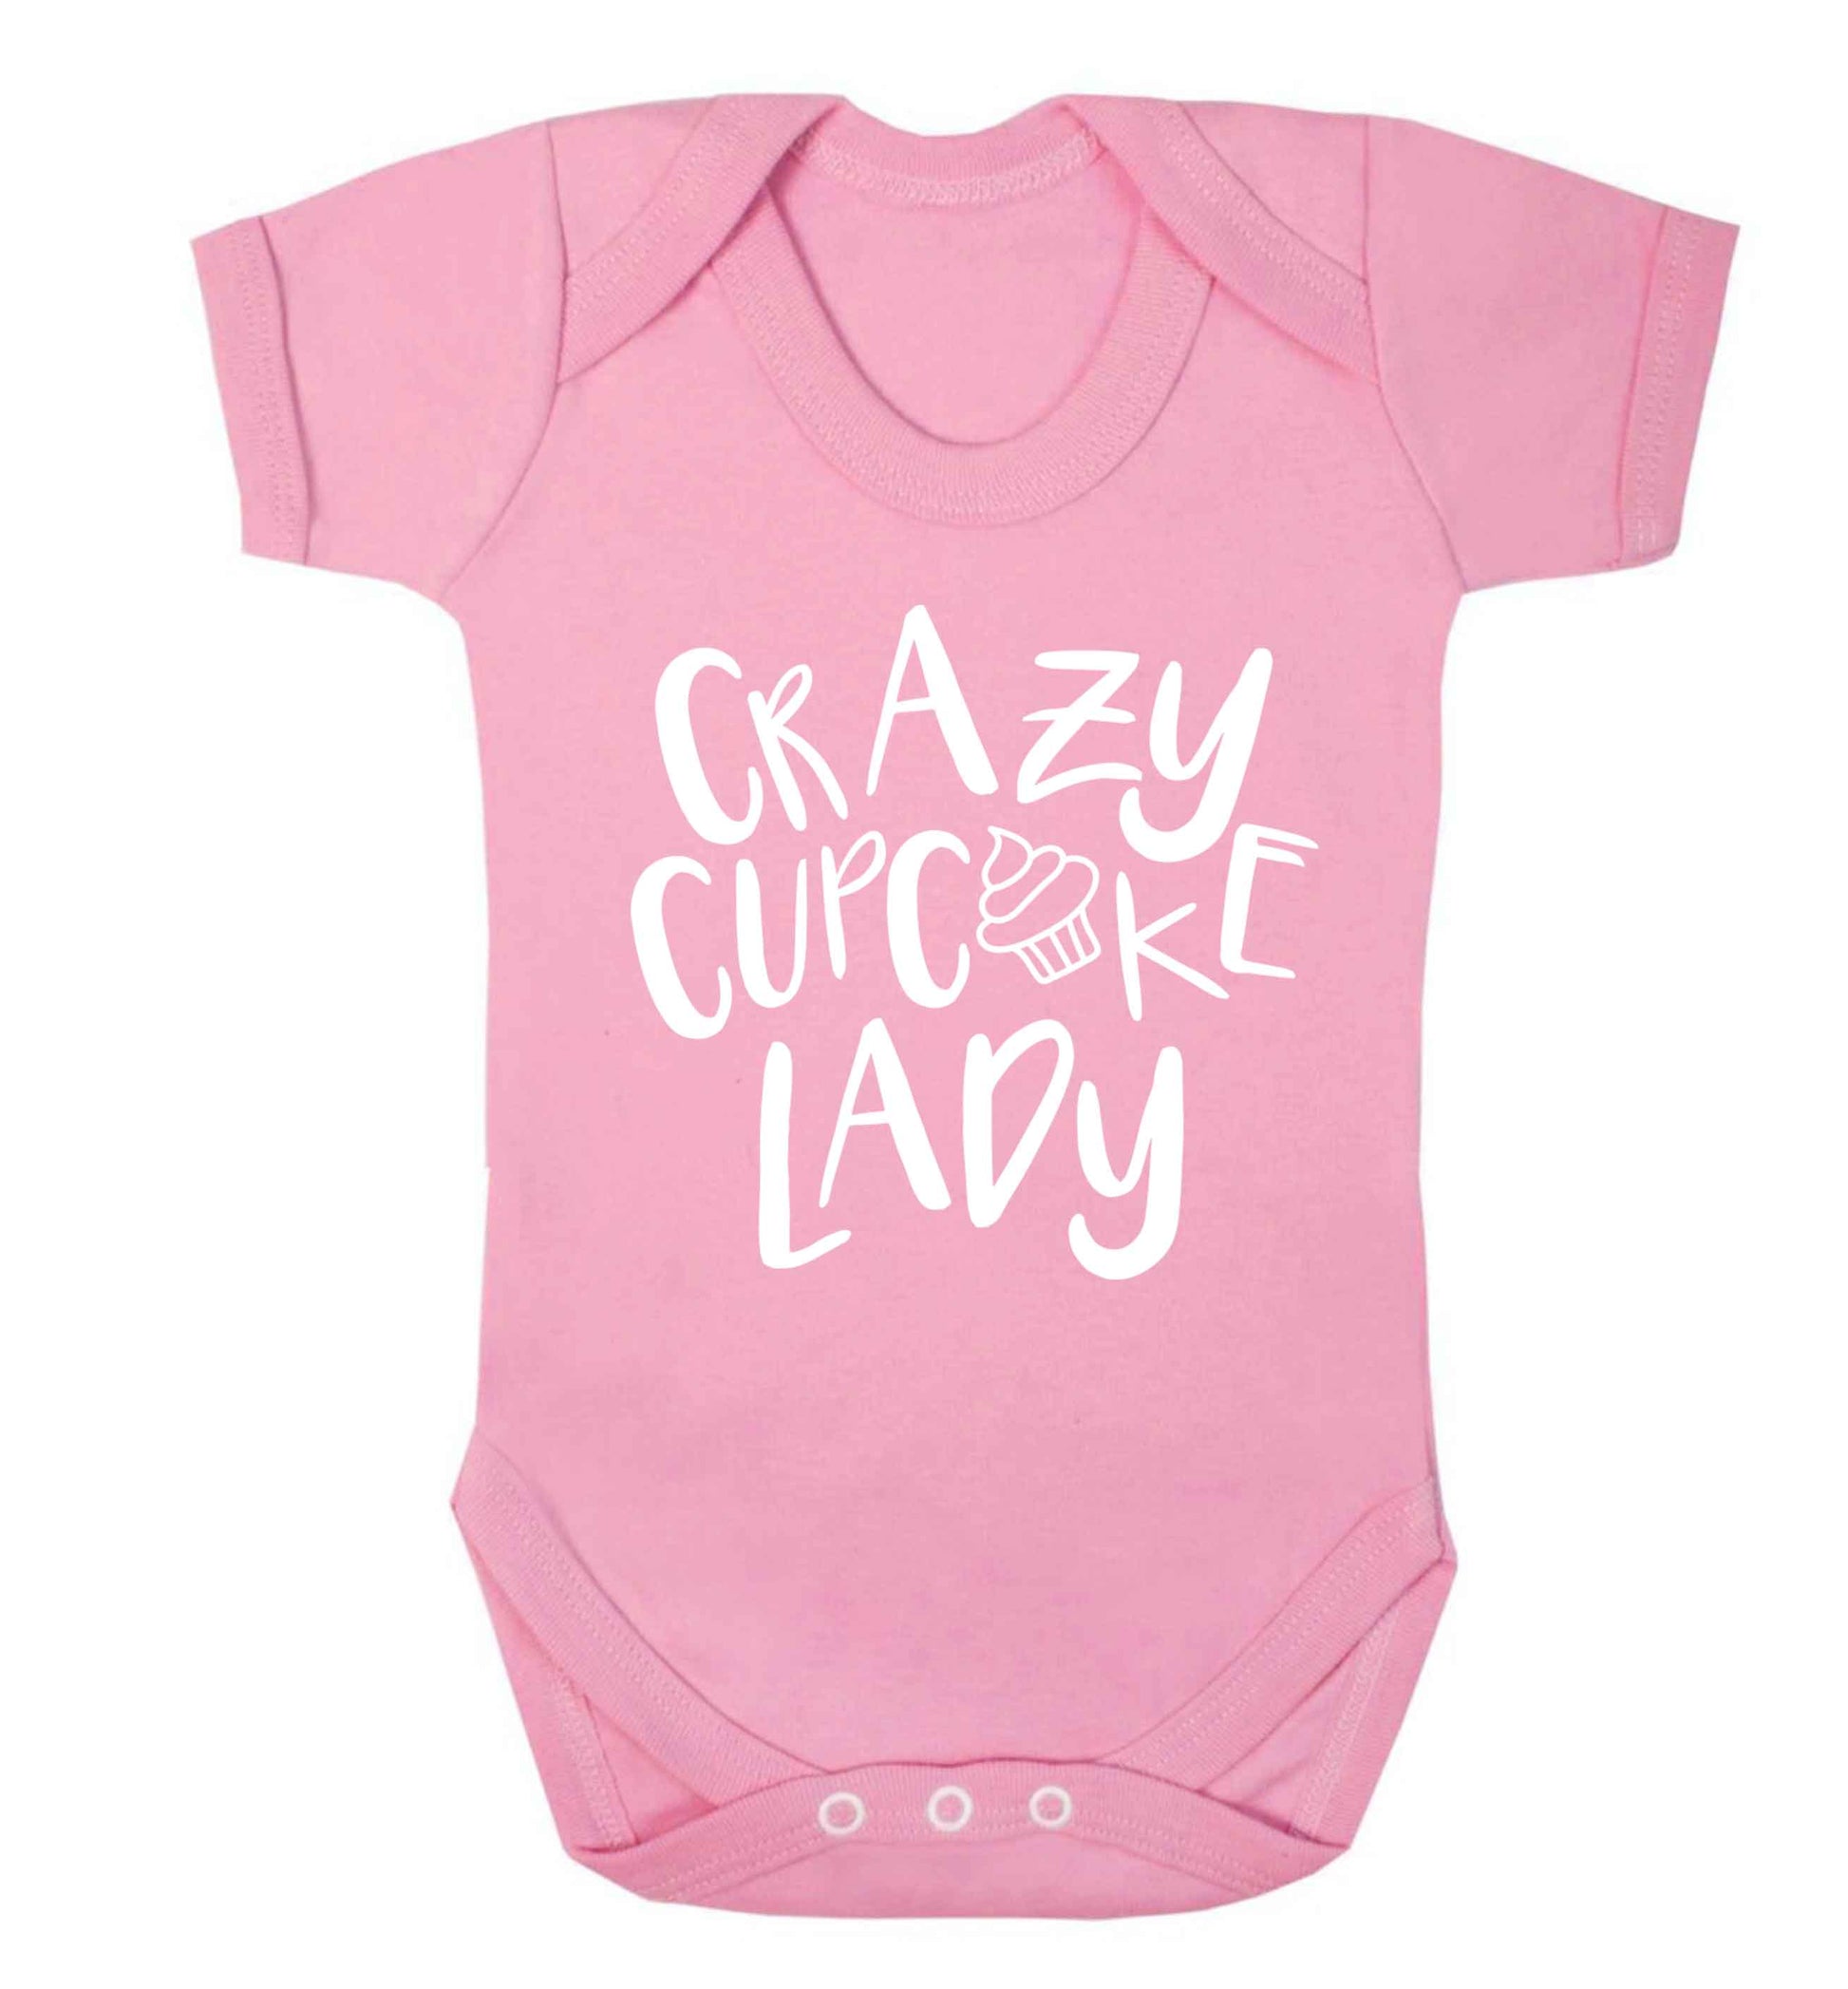 Crazy cupcake lady Baby Vest pale pink 18-24 months